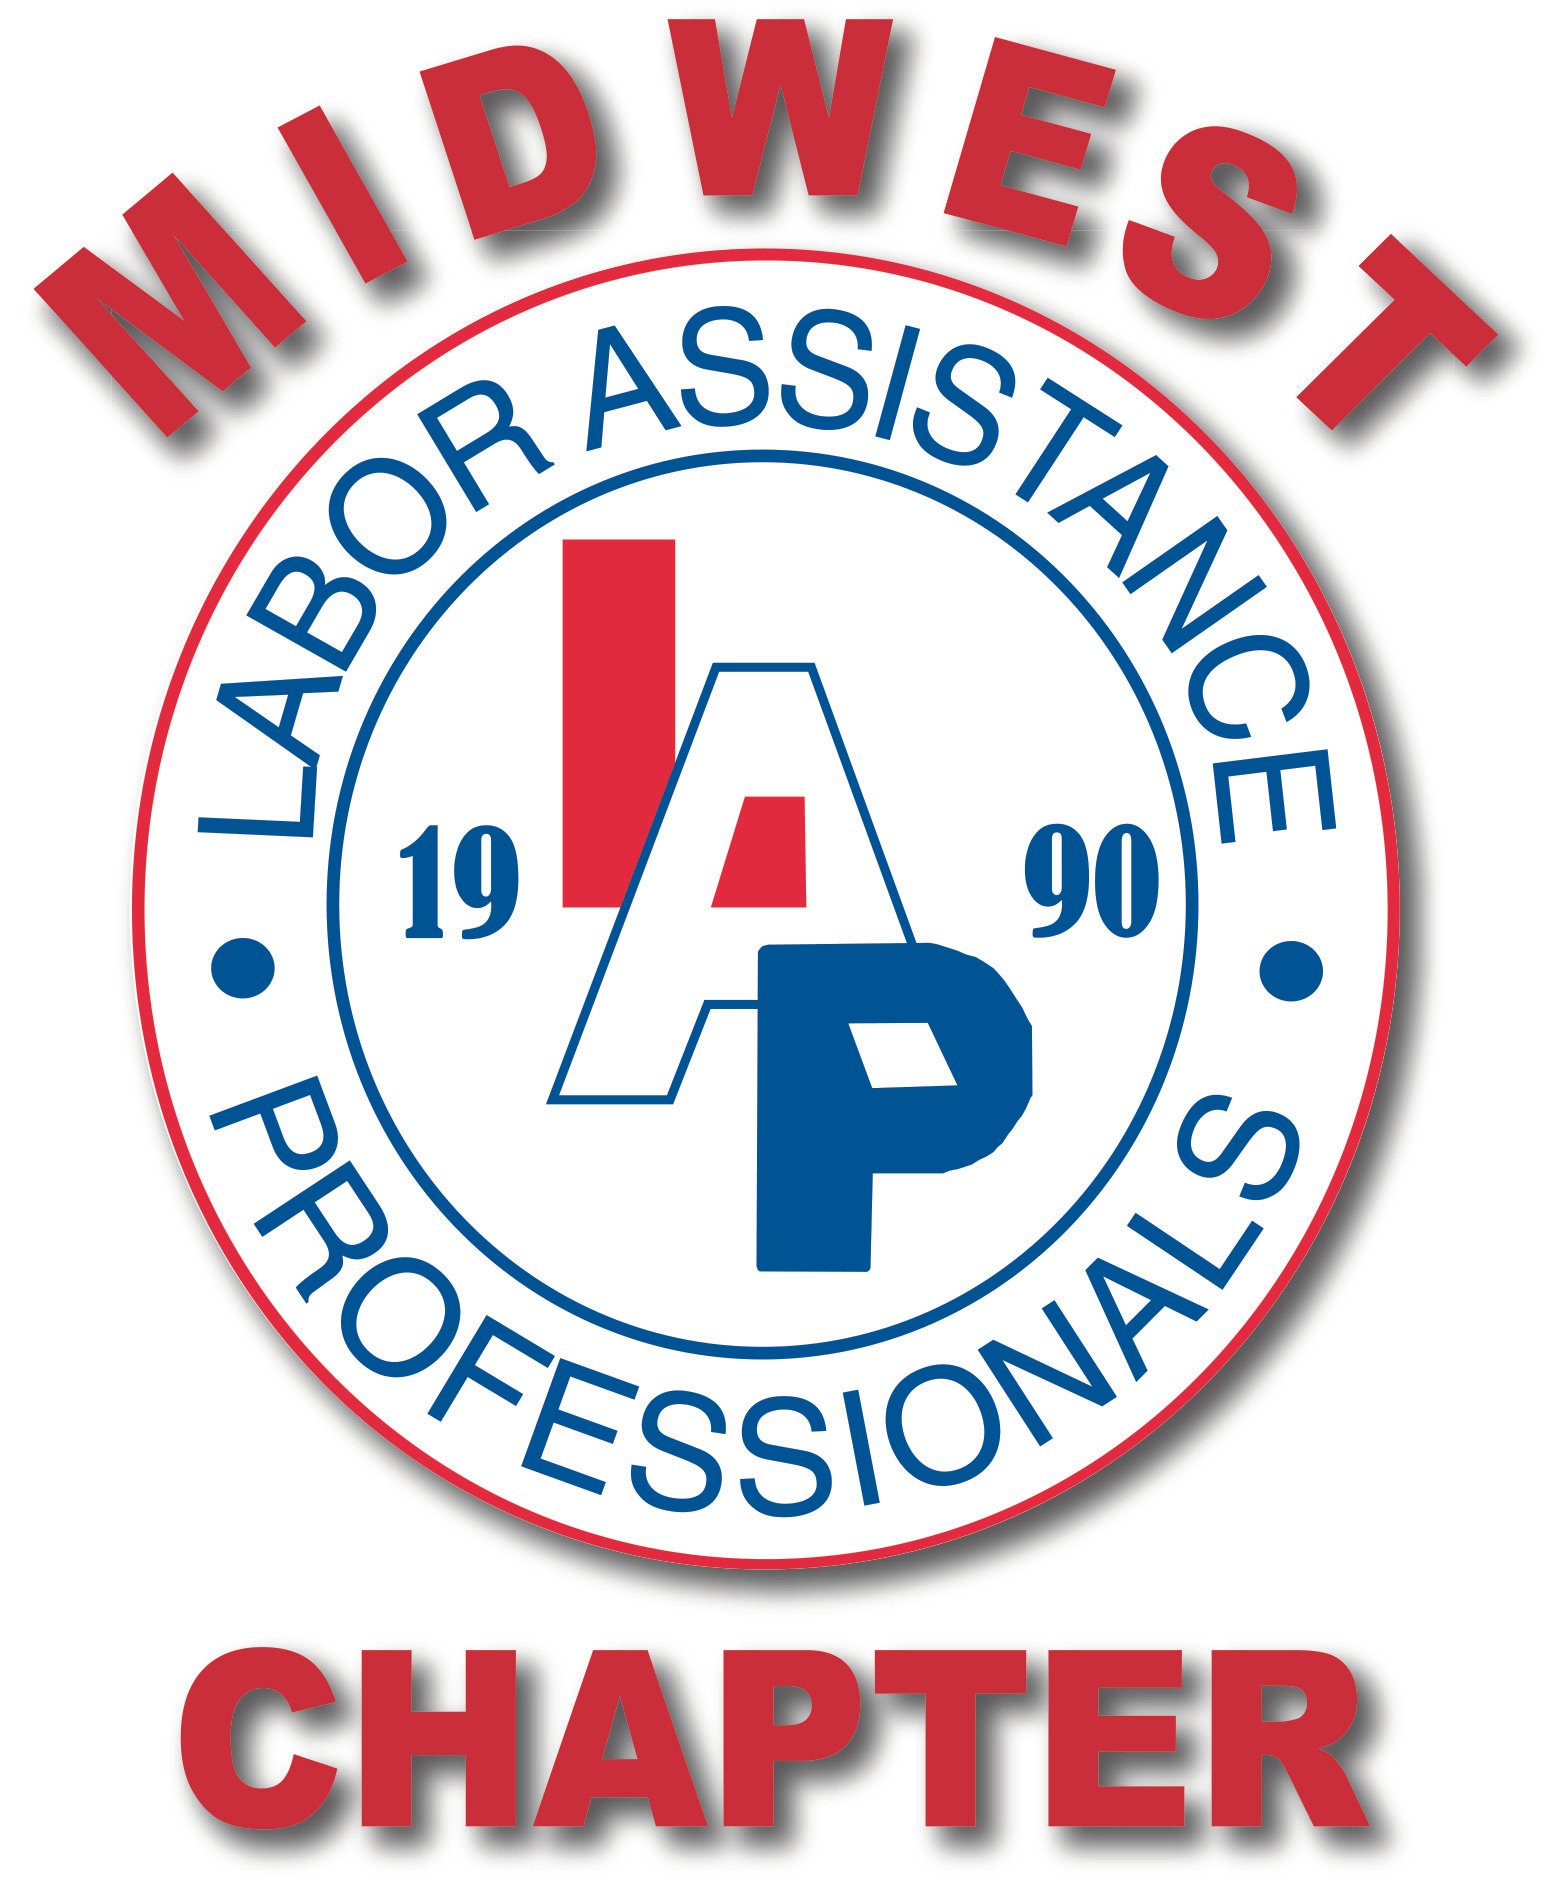 Midwest Chapter Logo.jpg